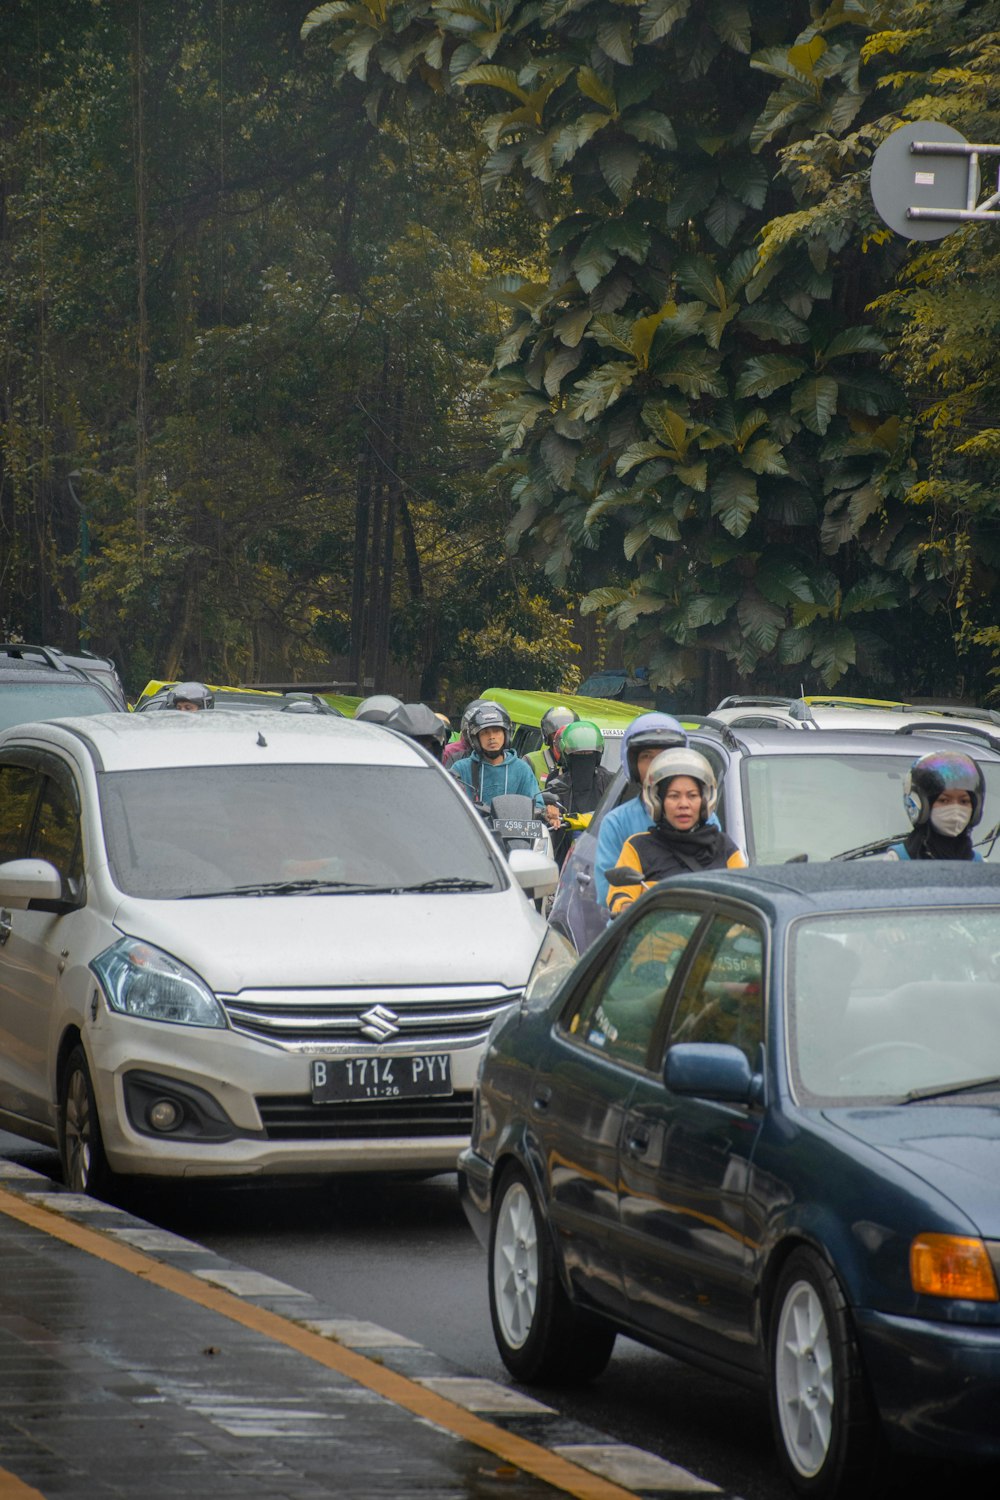 a group of people in helmets and rain gear on a road